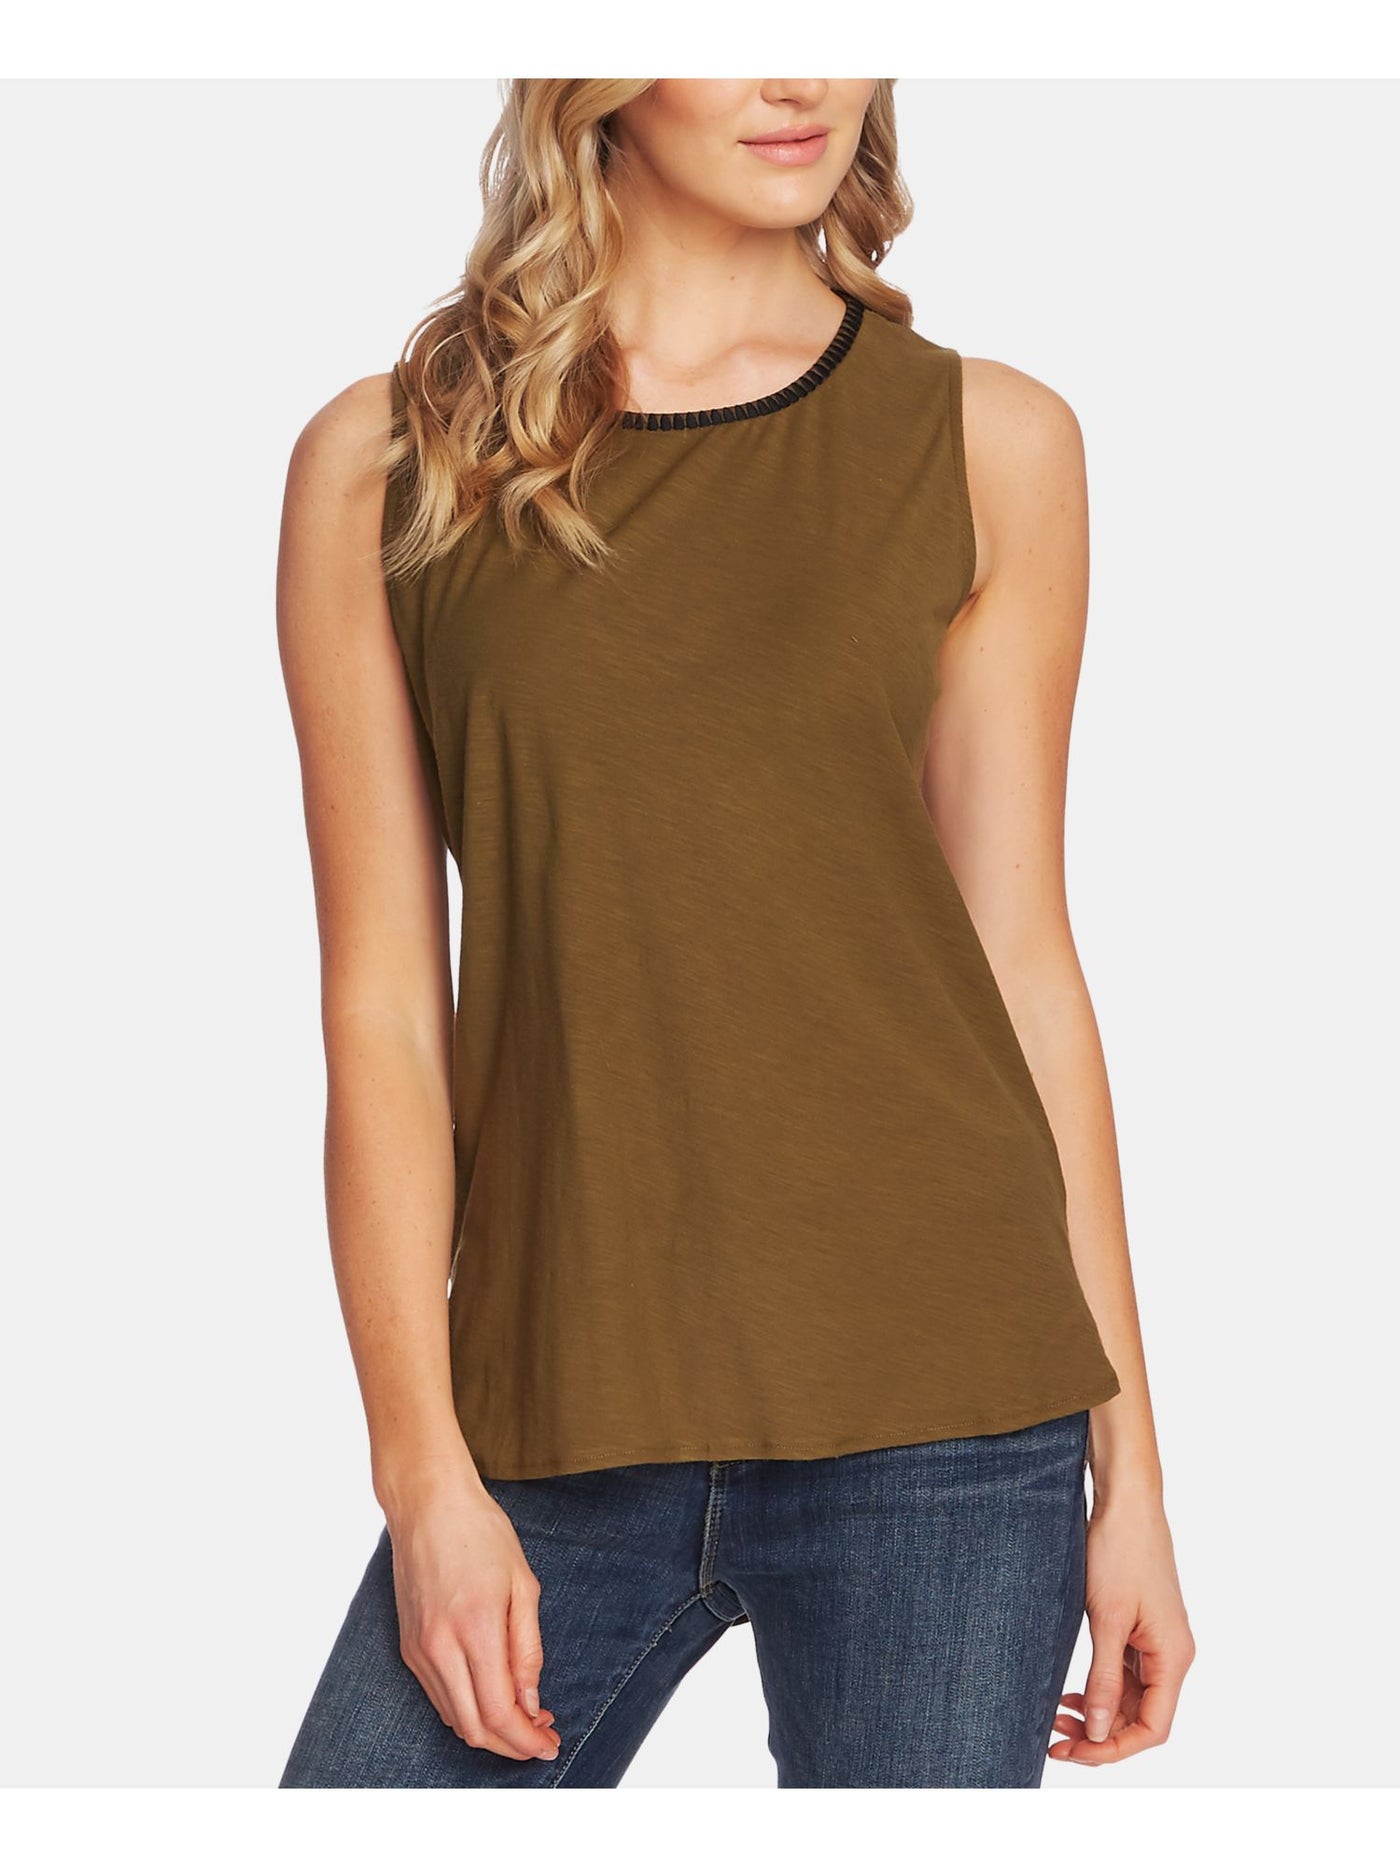 VINCE CAMUTO Womens Green Sleeveless Jewel Neck Top Size: M